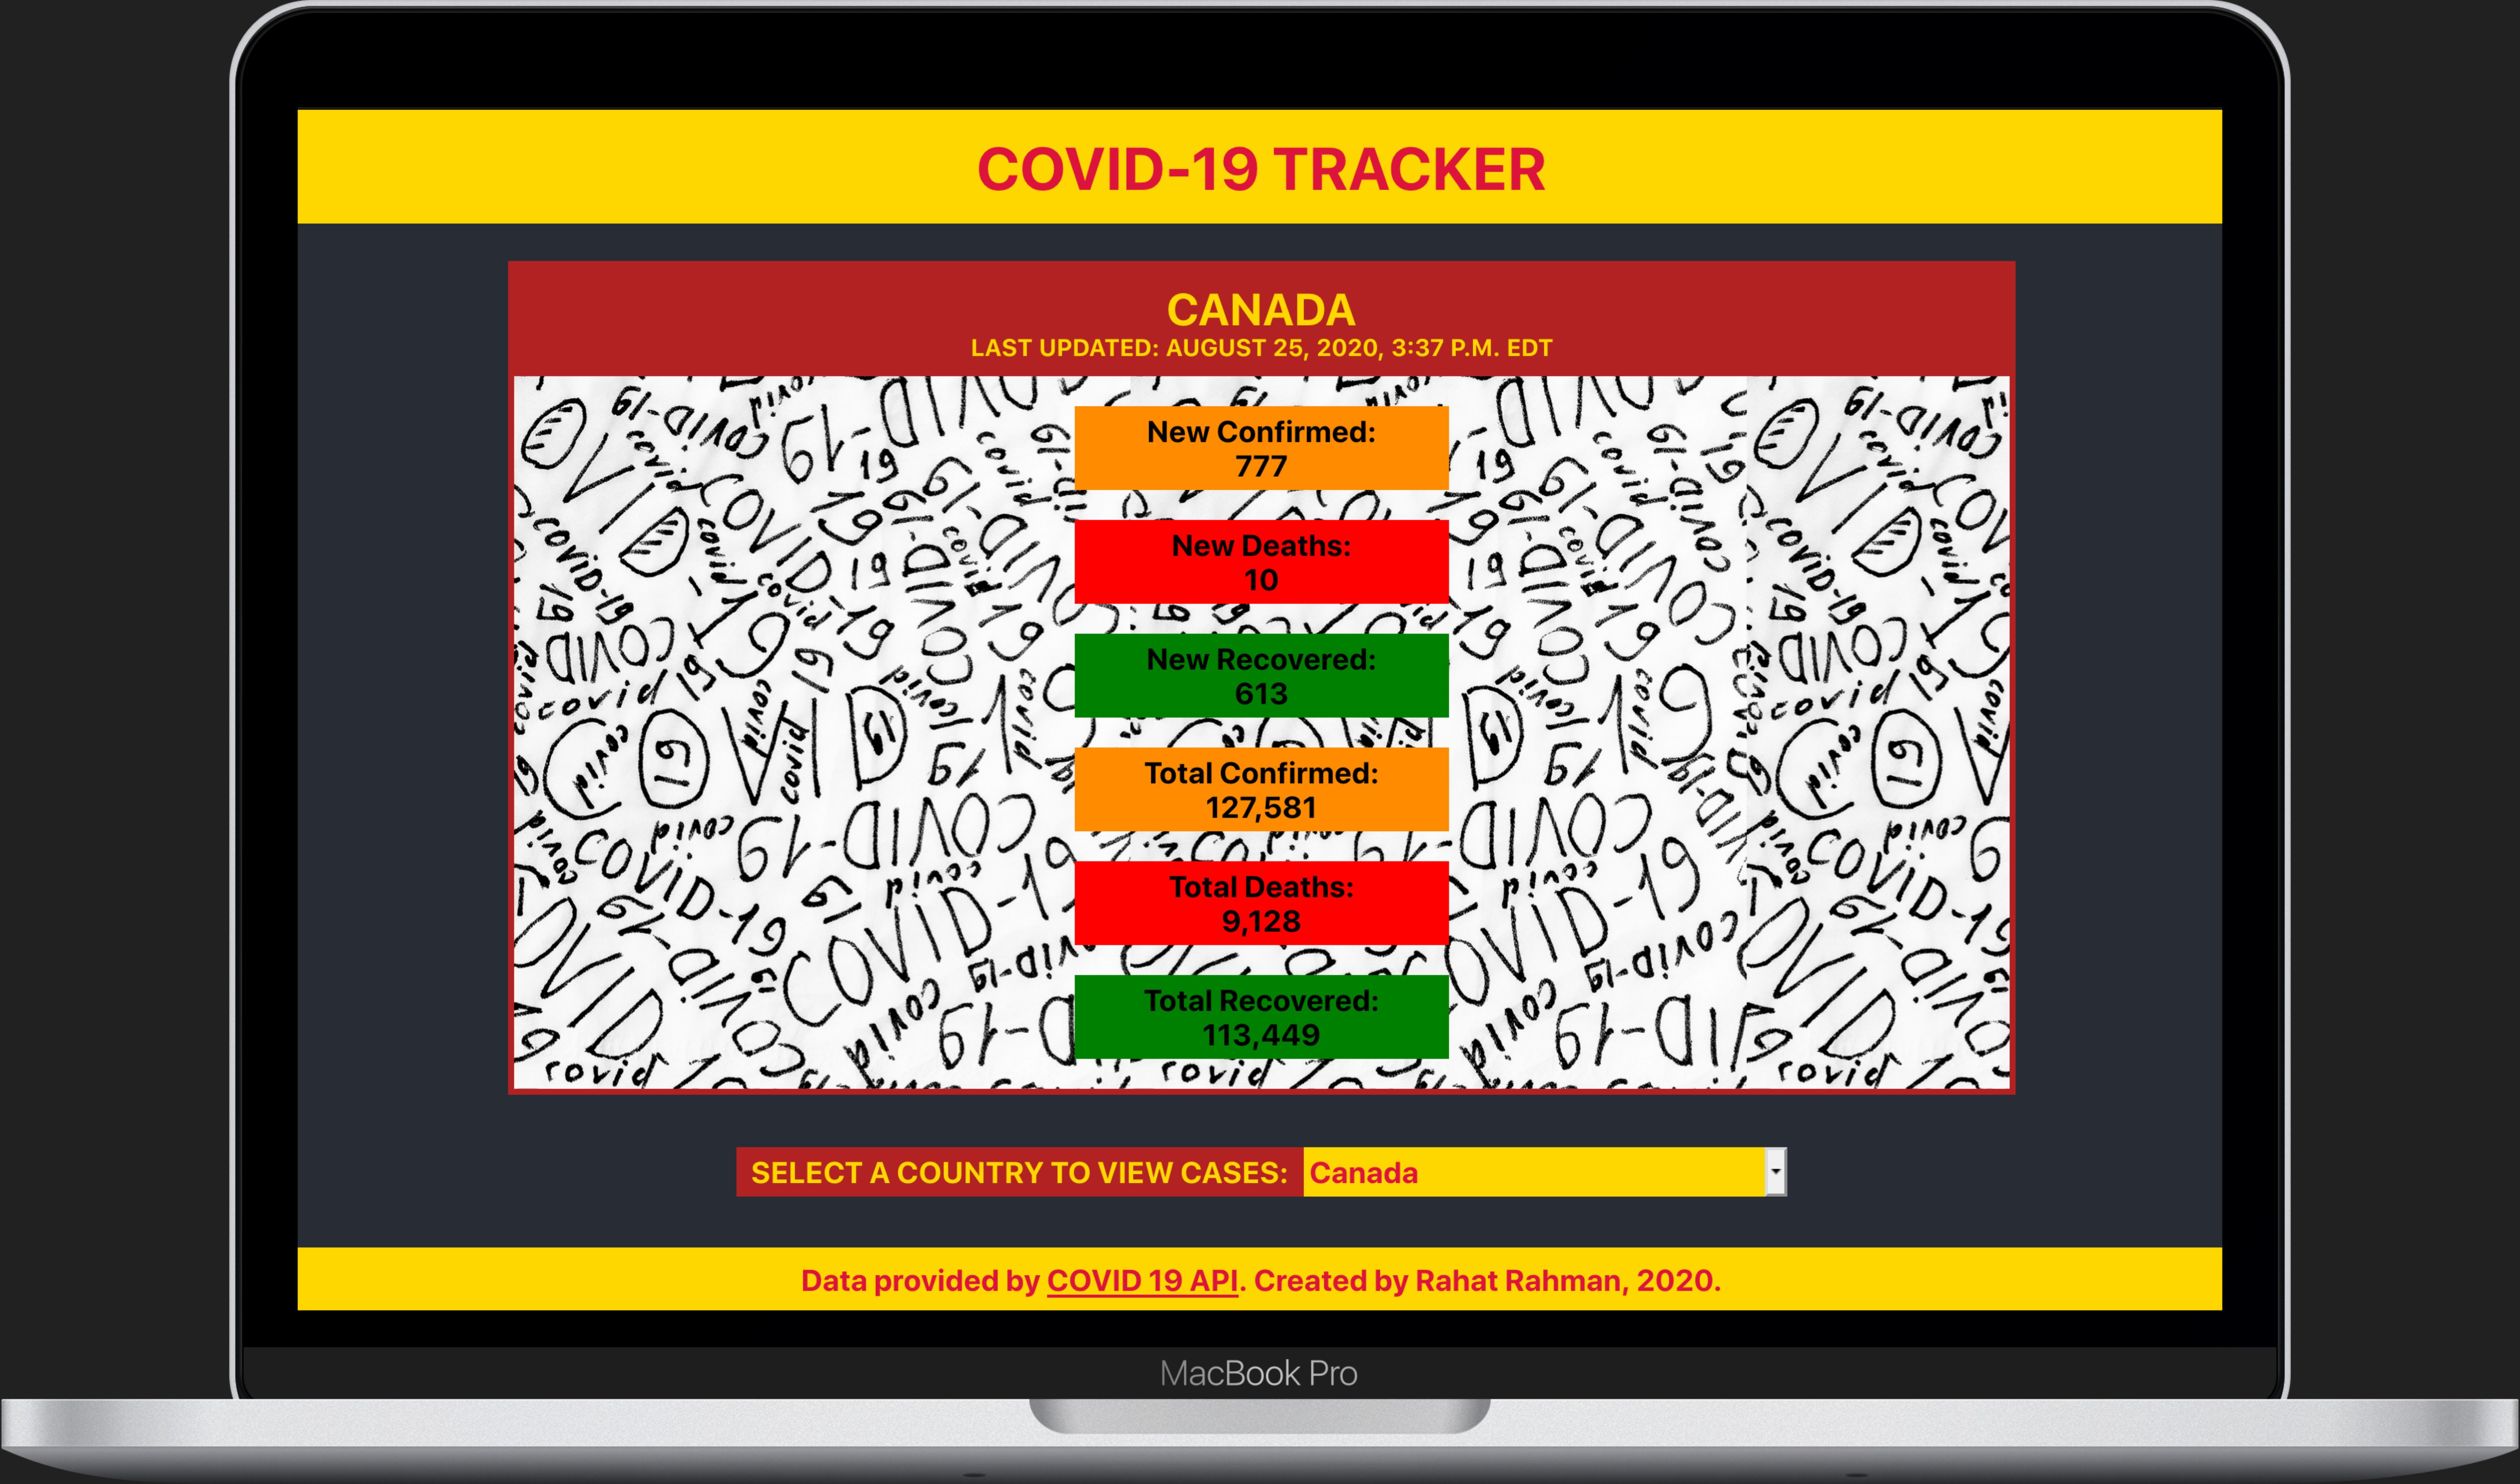 Screenshot of Covid-19 project showing the Canadian case numbers on August 25, 2020 at 3:37 P.M. EDT.